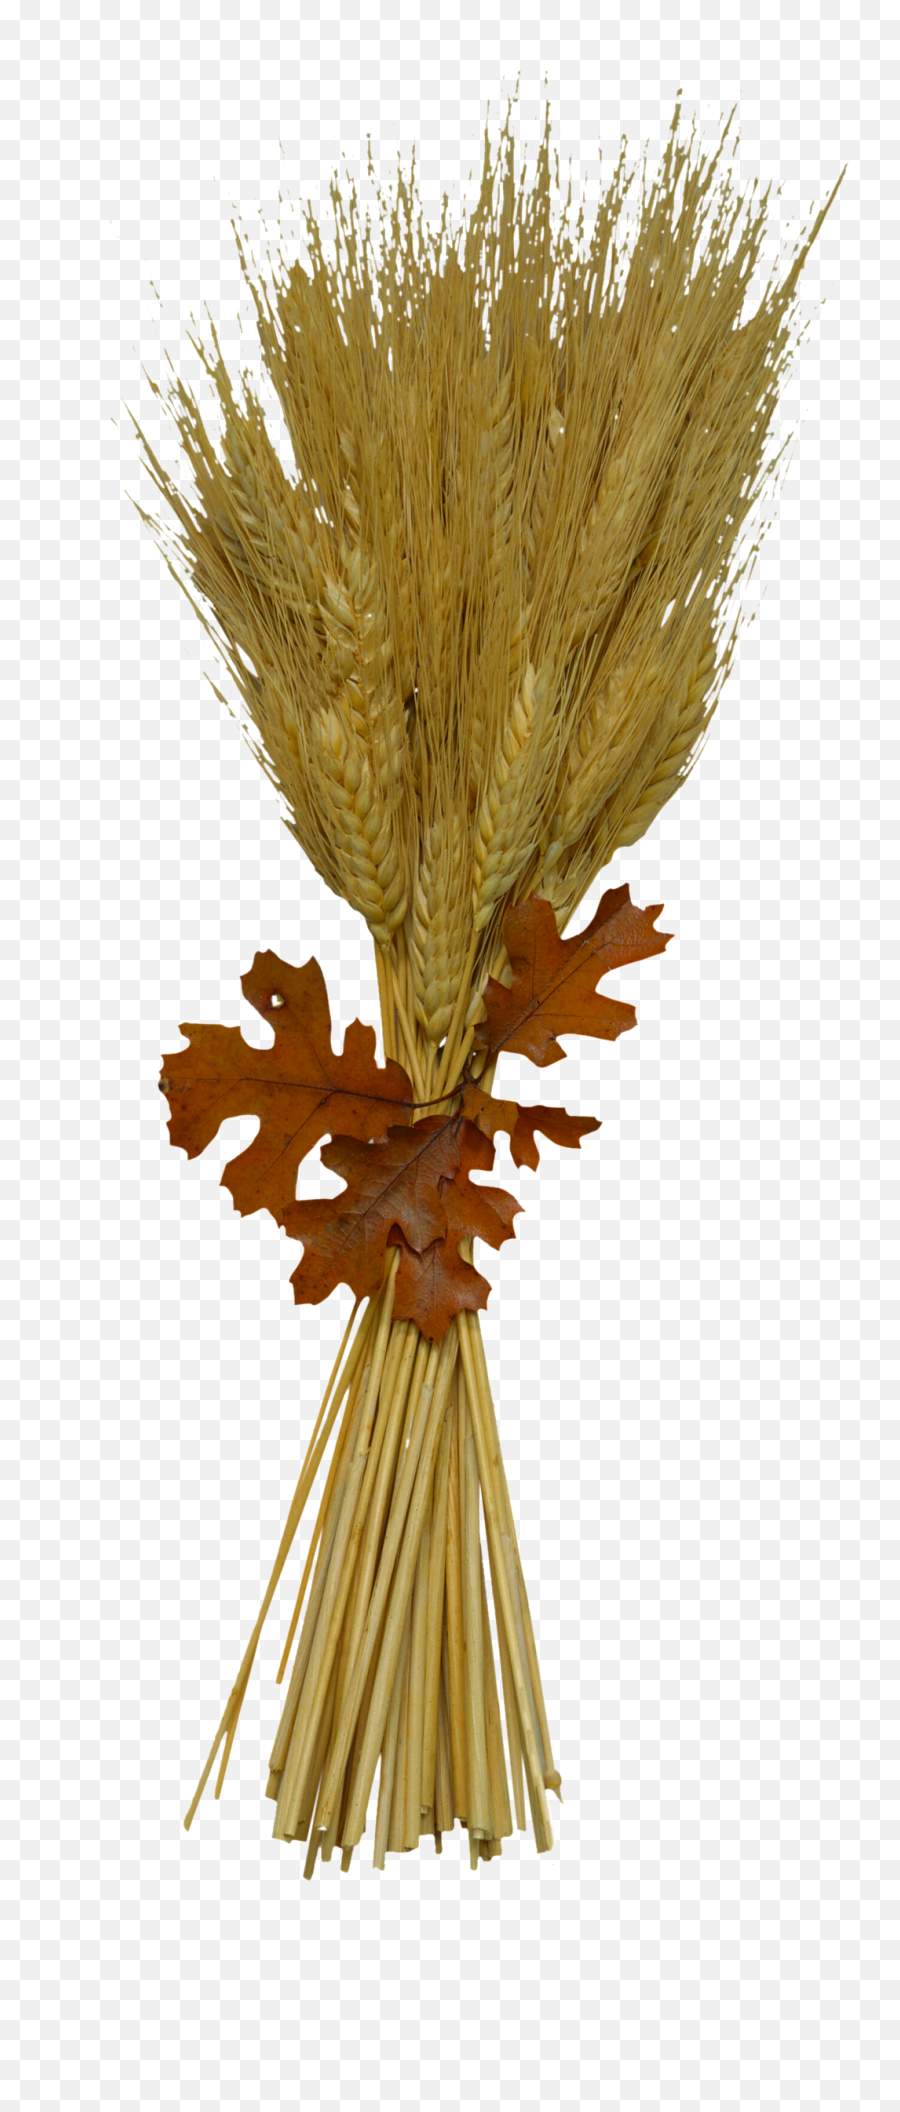 Download Wheat Png Image For Free Emoji,Wheat Transparent Background